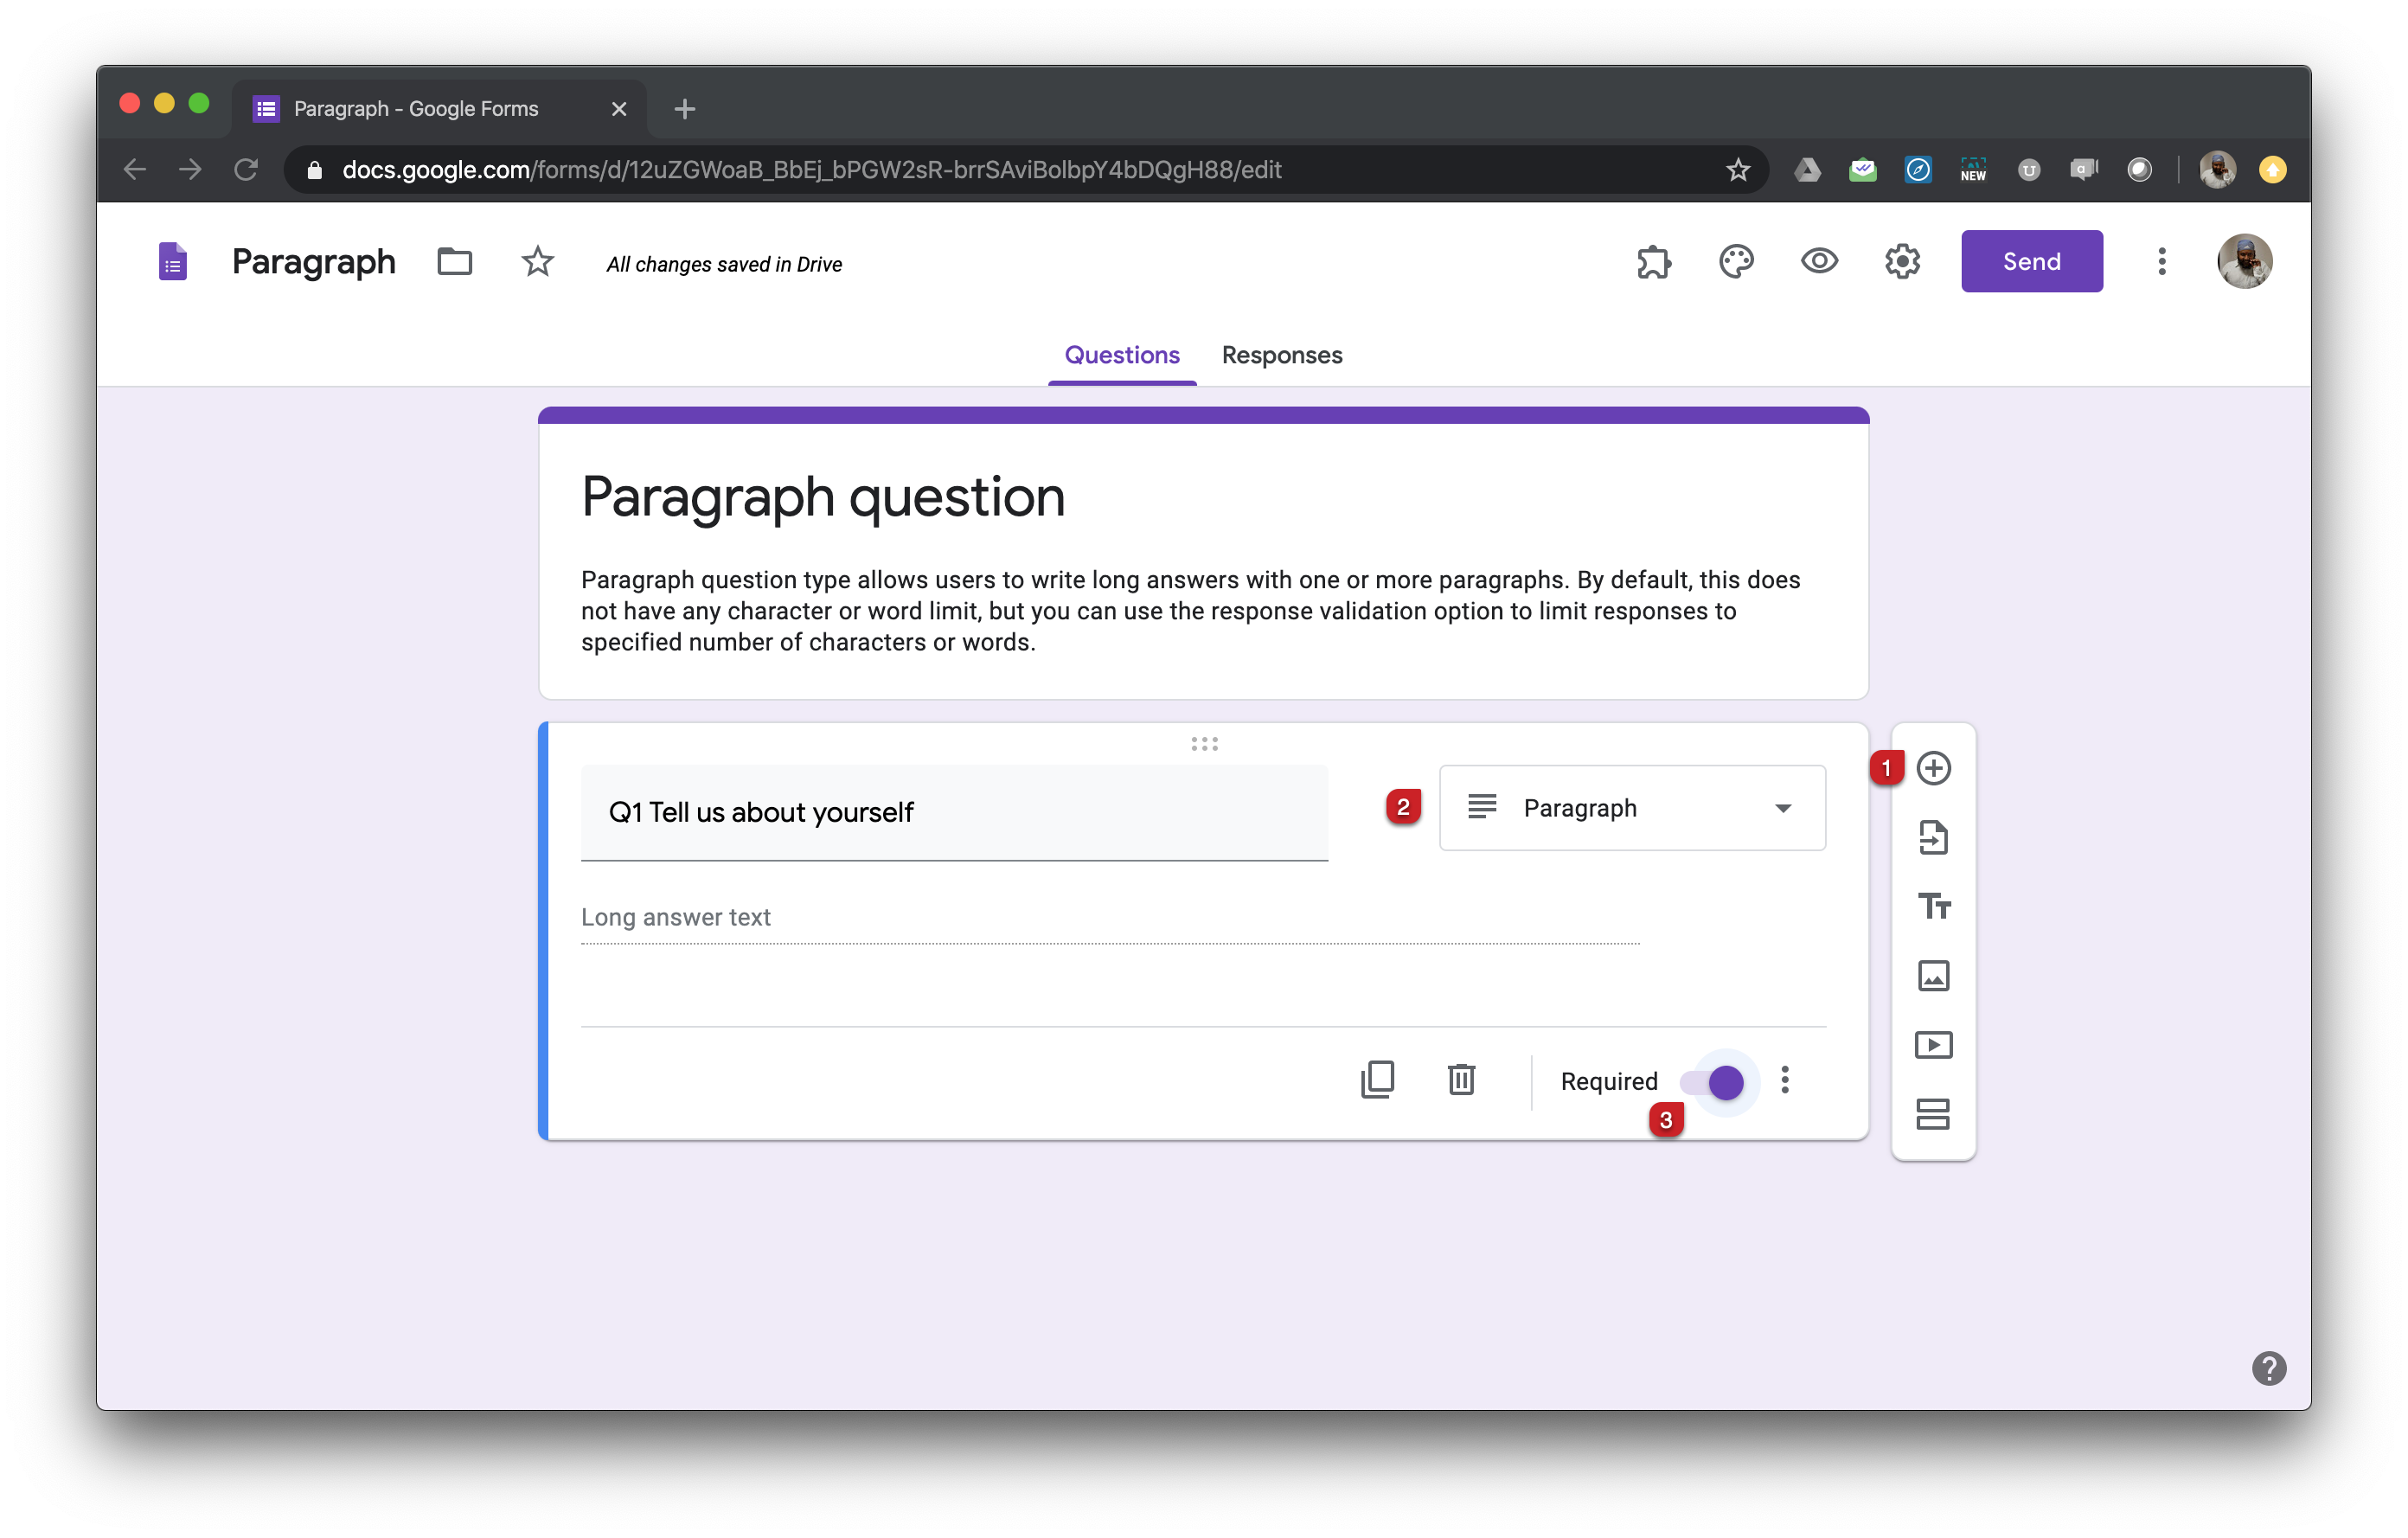 Paragraph question allows users to write long answers with one or more paragraphs. By default, this does not have any character or word limit, but you can use the response validation option to limit responses to specified number of characters or words.